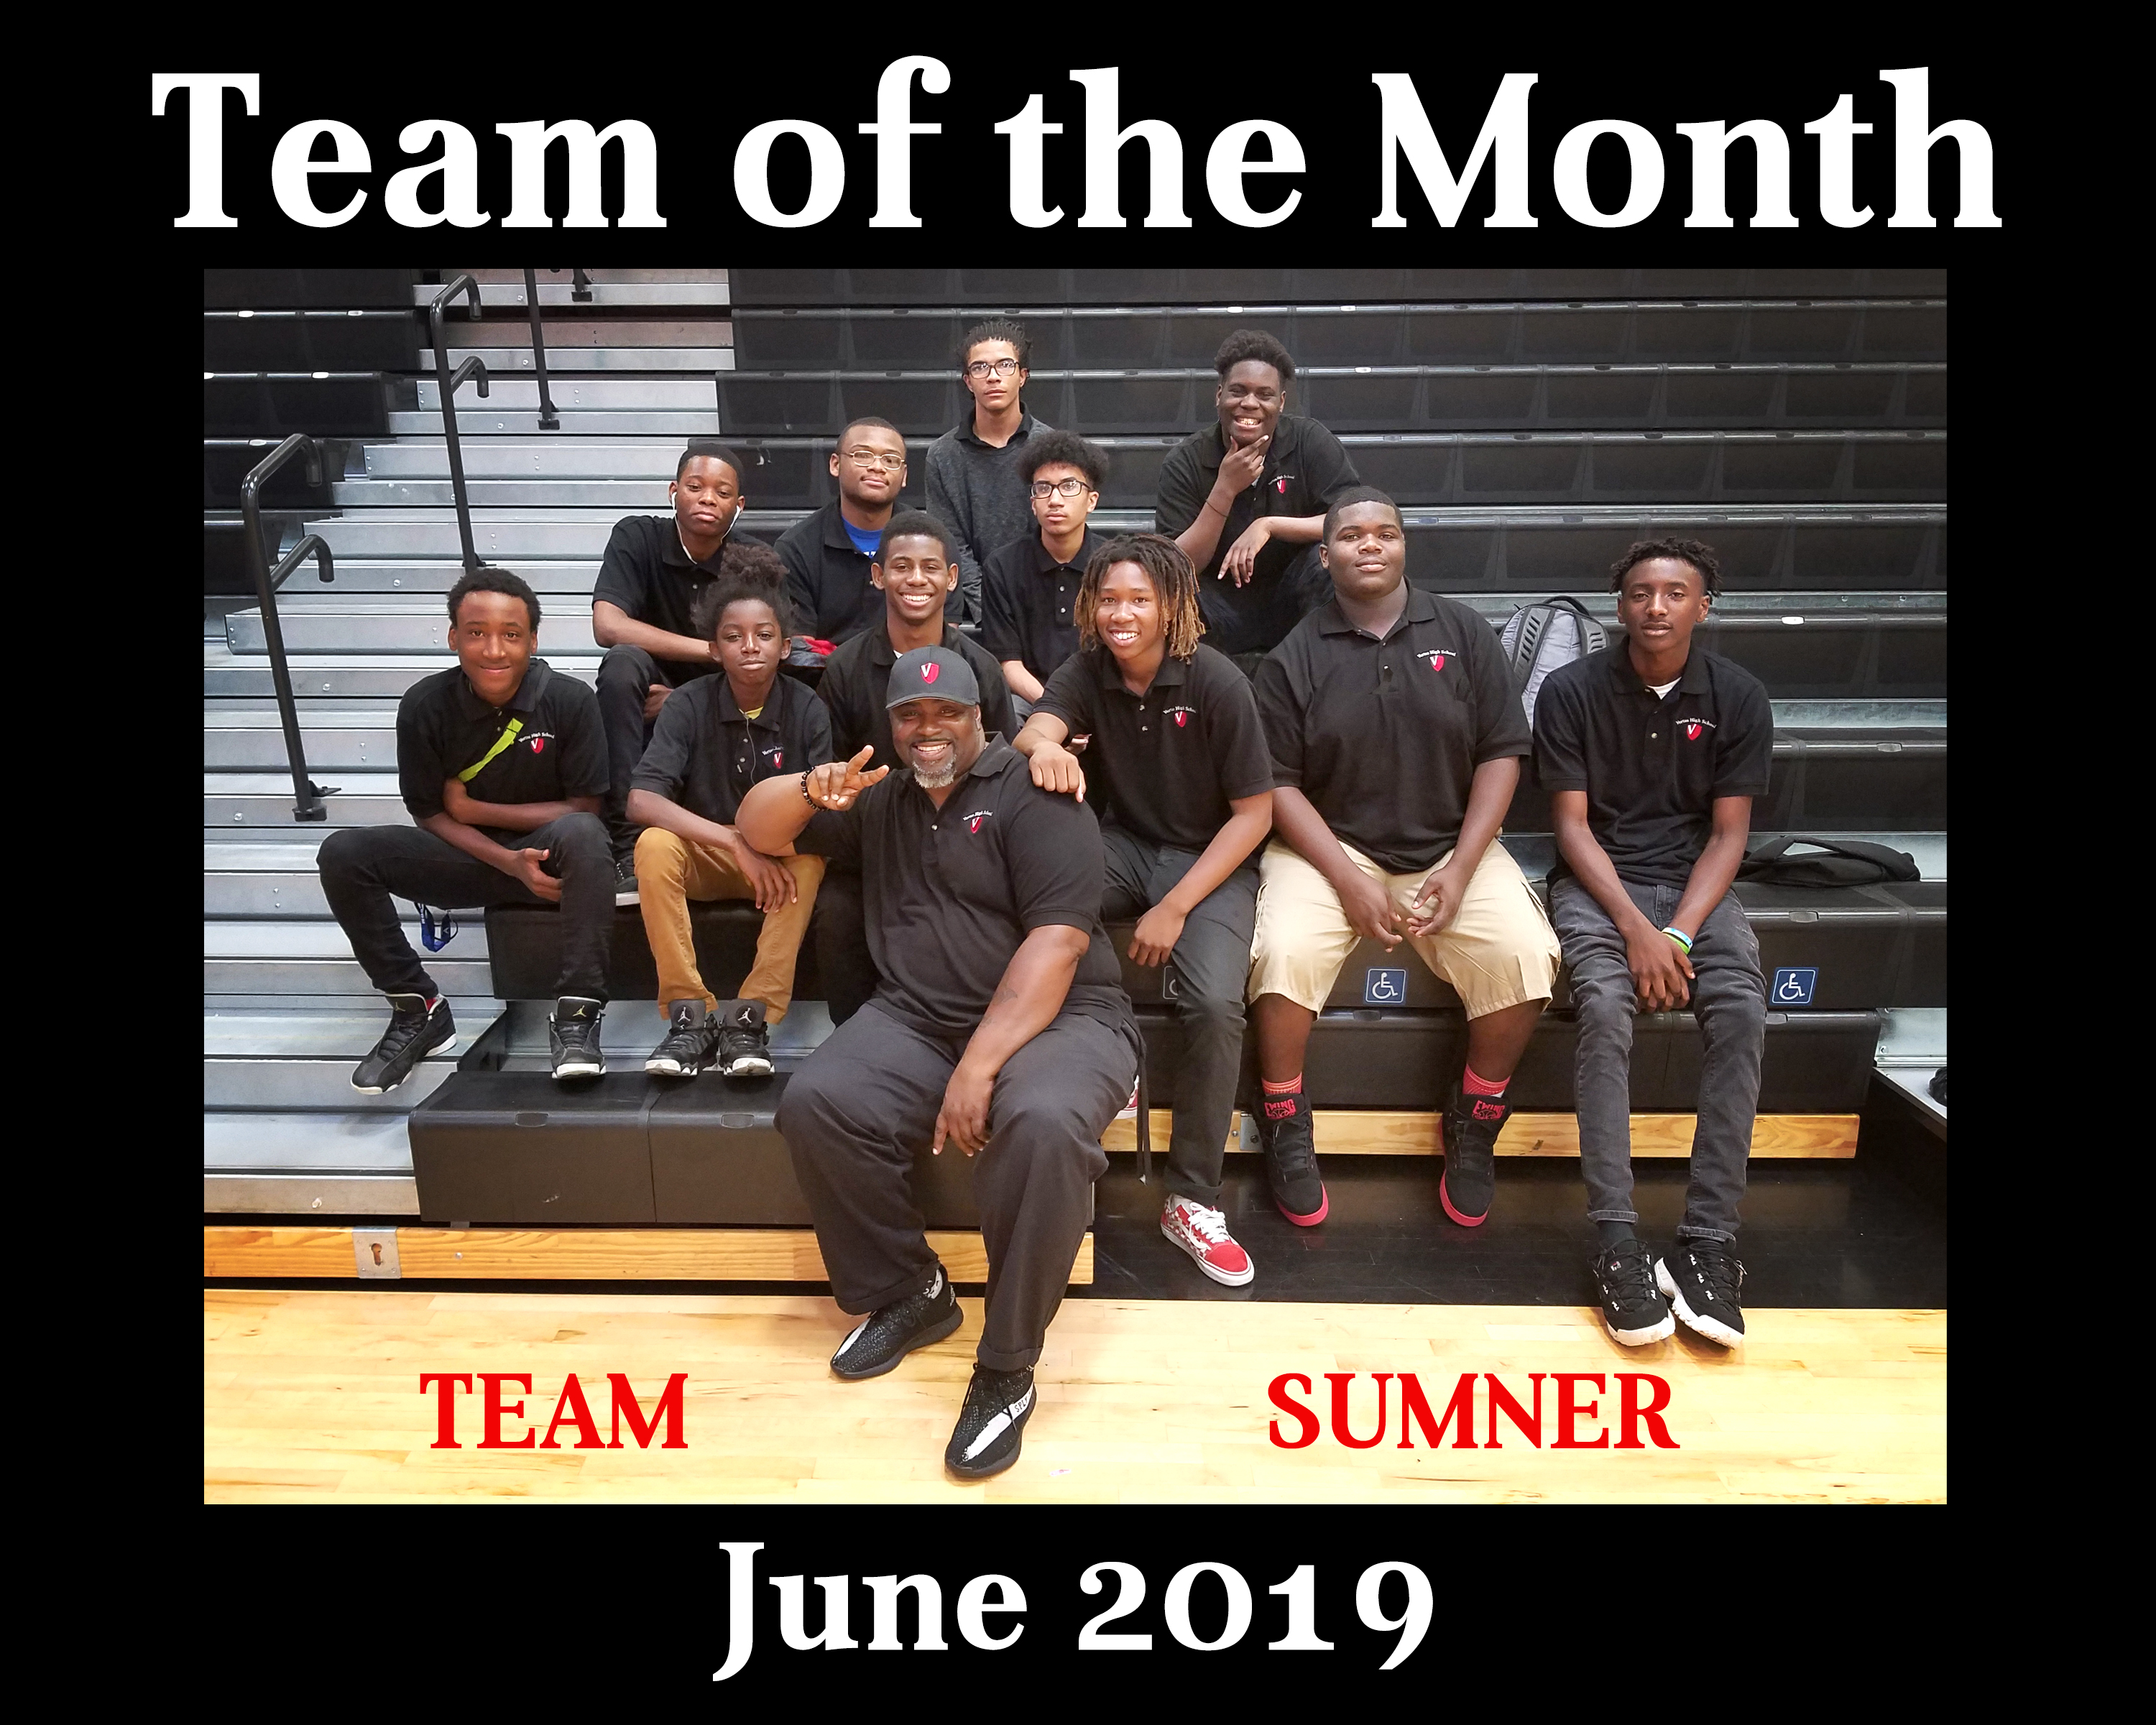 Team of the Month - June 2019